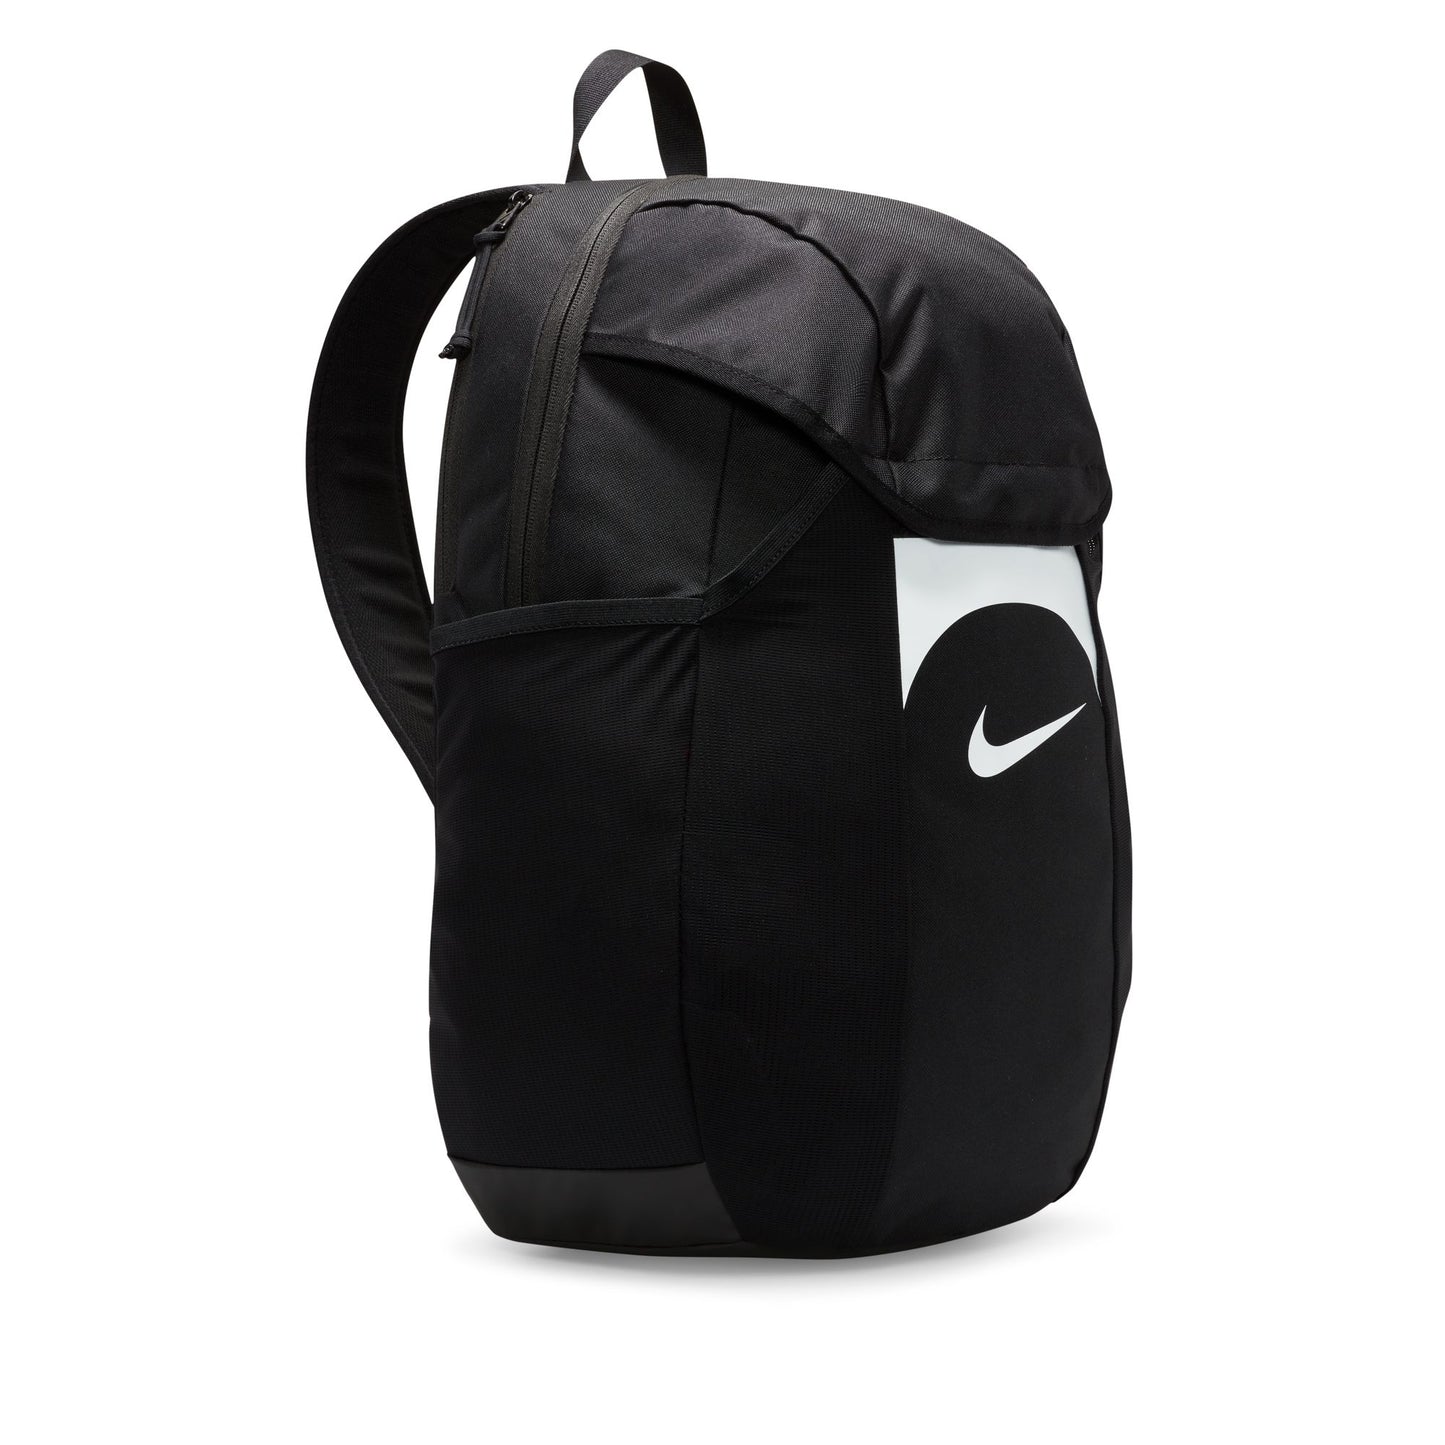 NAPIER SOUTH FC TEAM BACKPACK